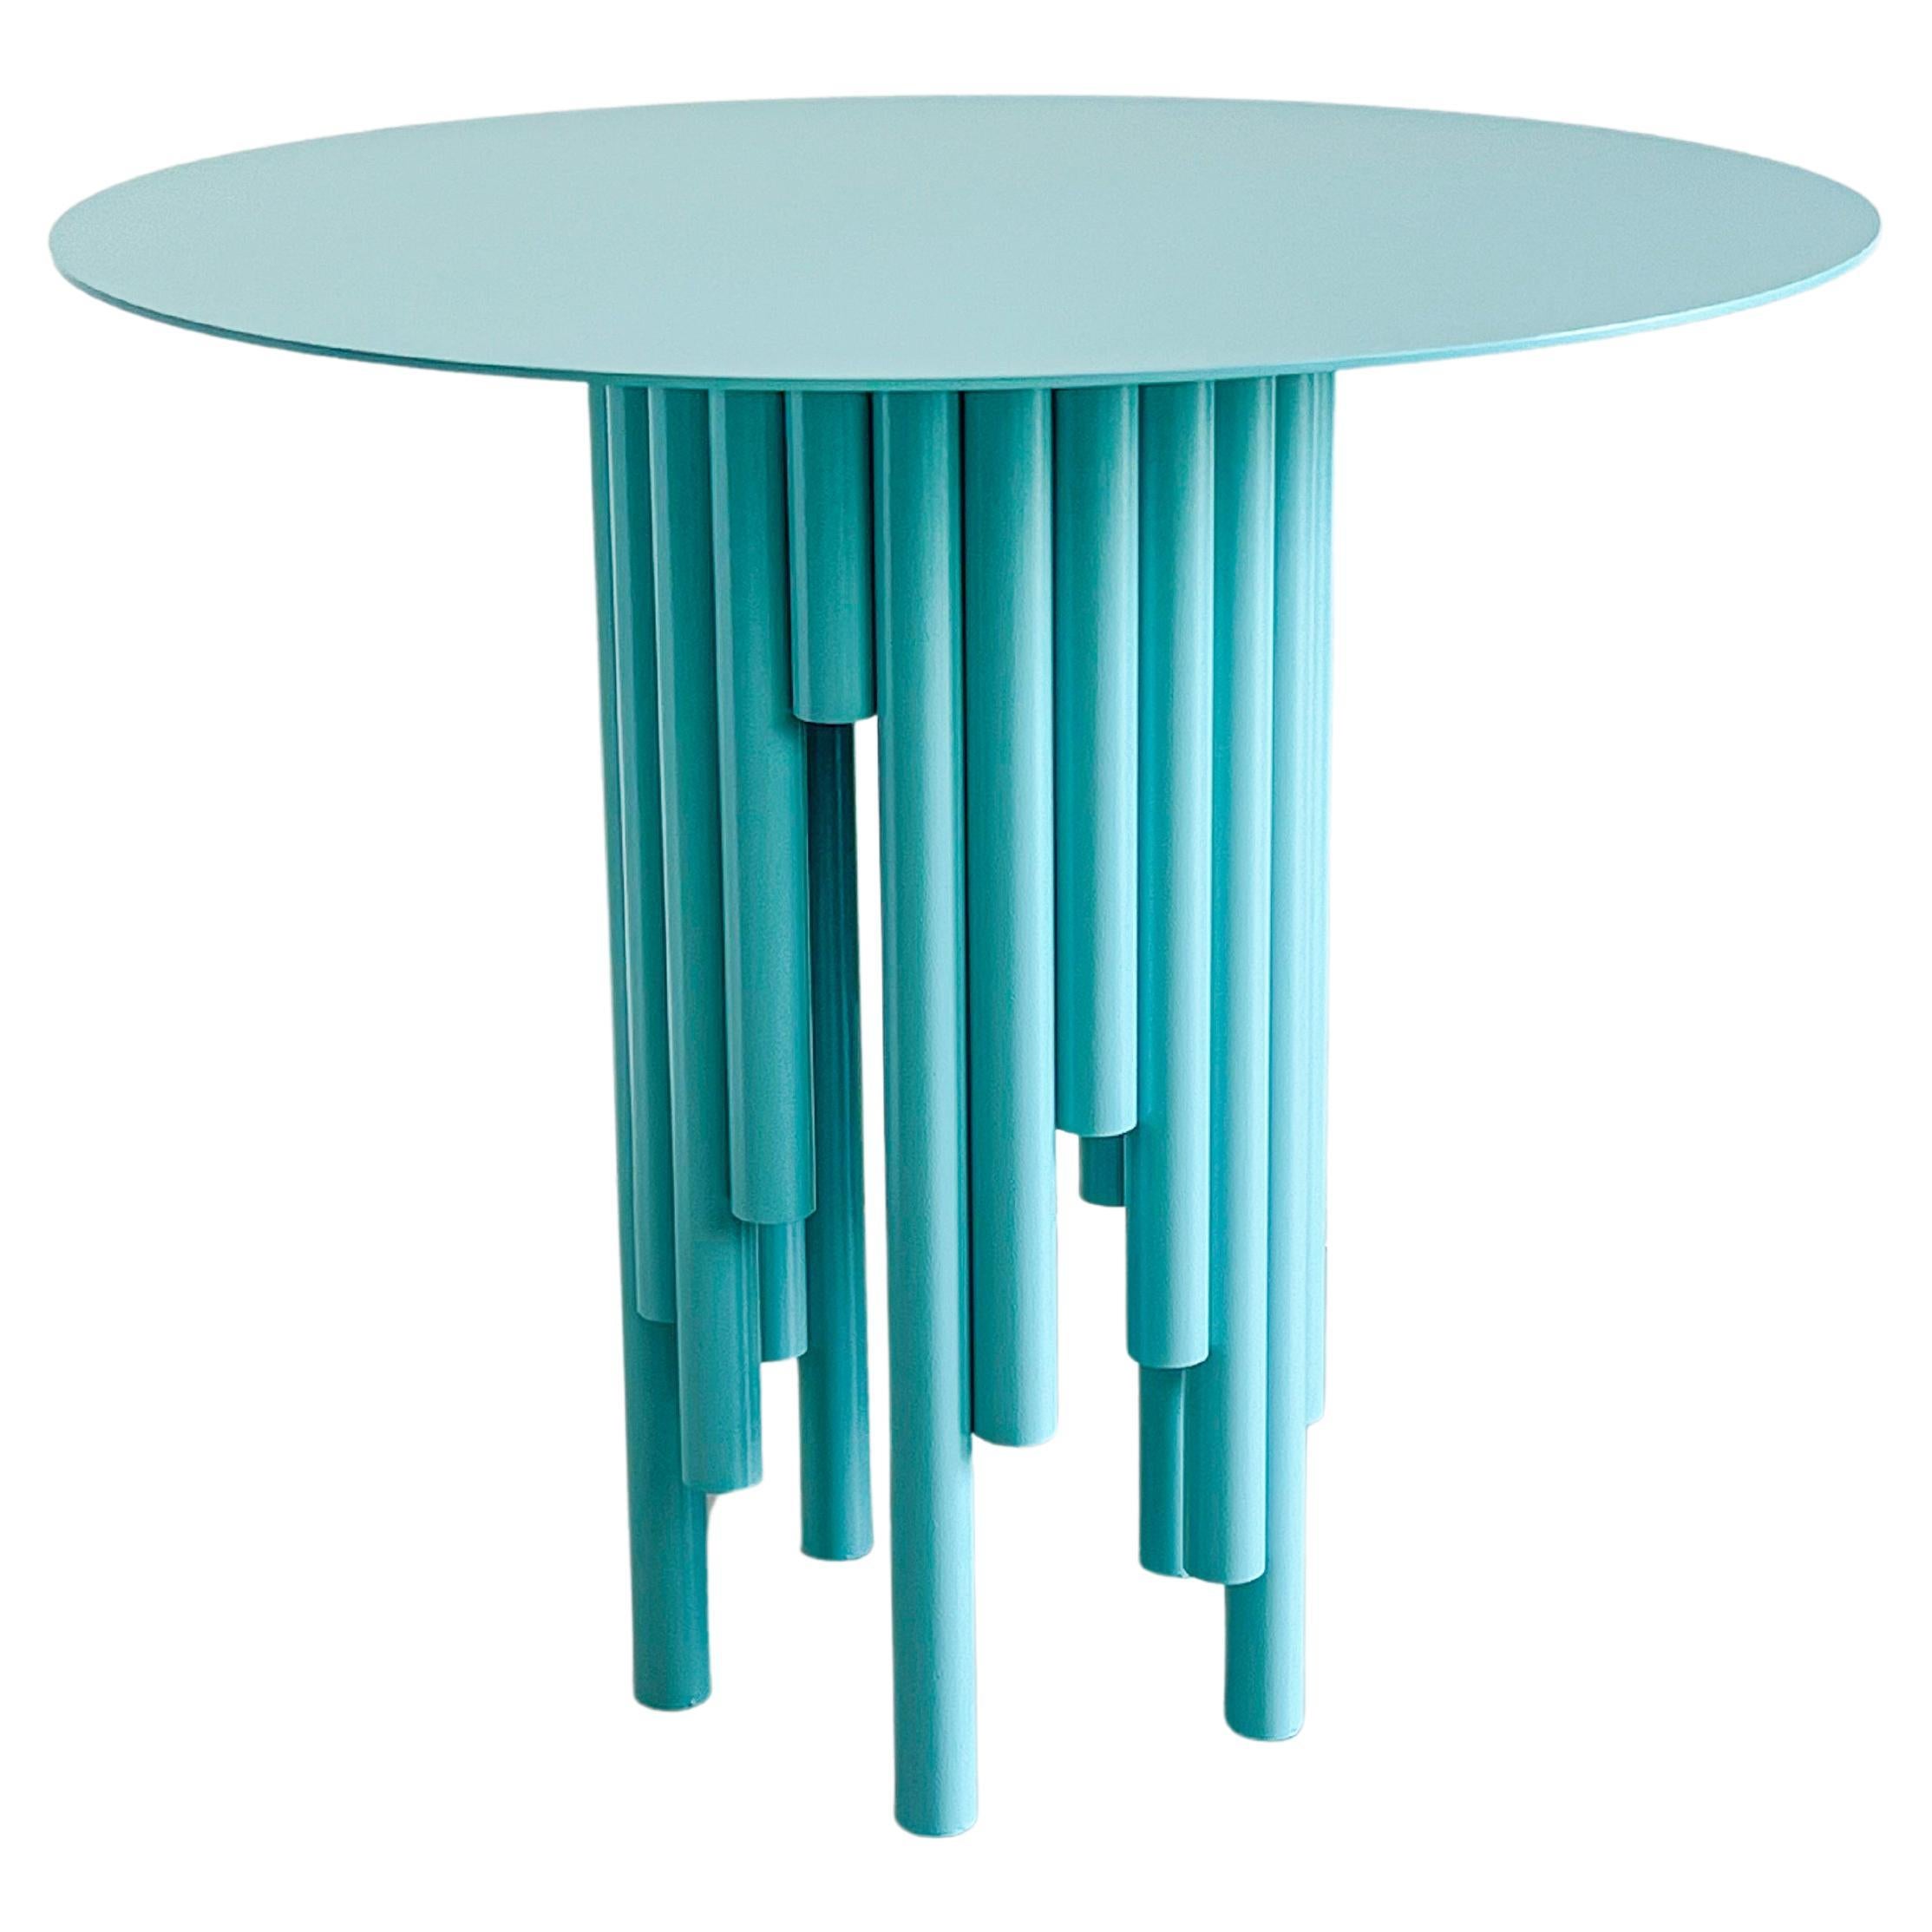 Round Dining Table / Kitchen Table / Tea Table / Entryway Table in Tiffany Blue For Sale